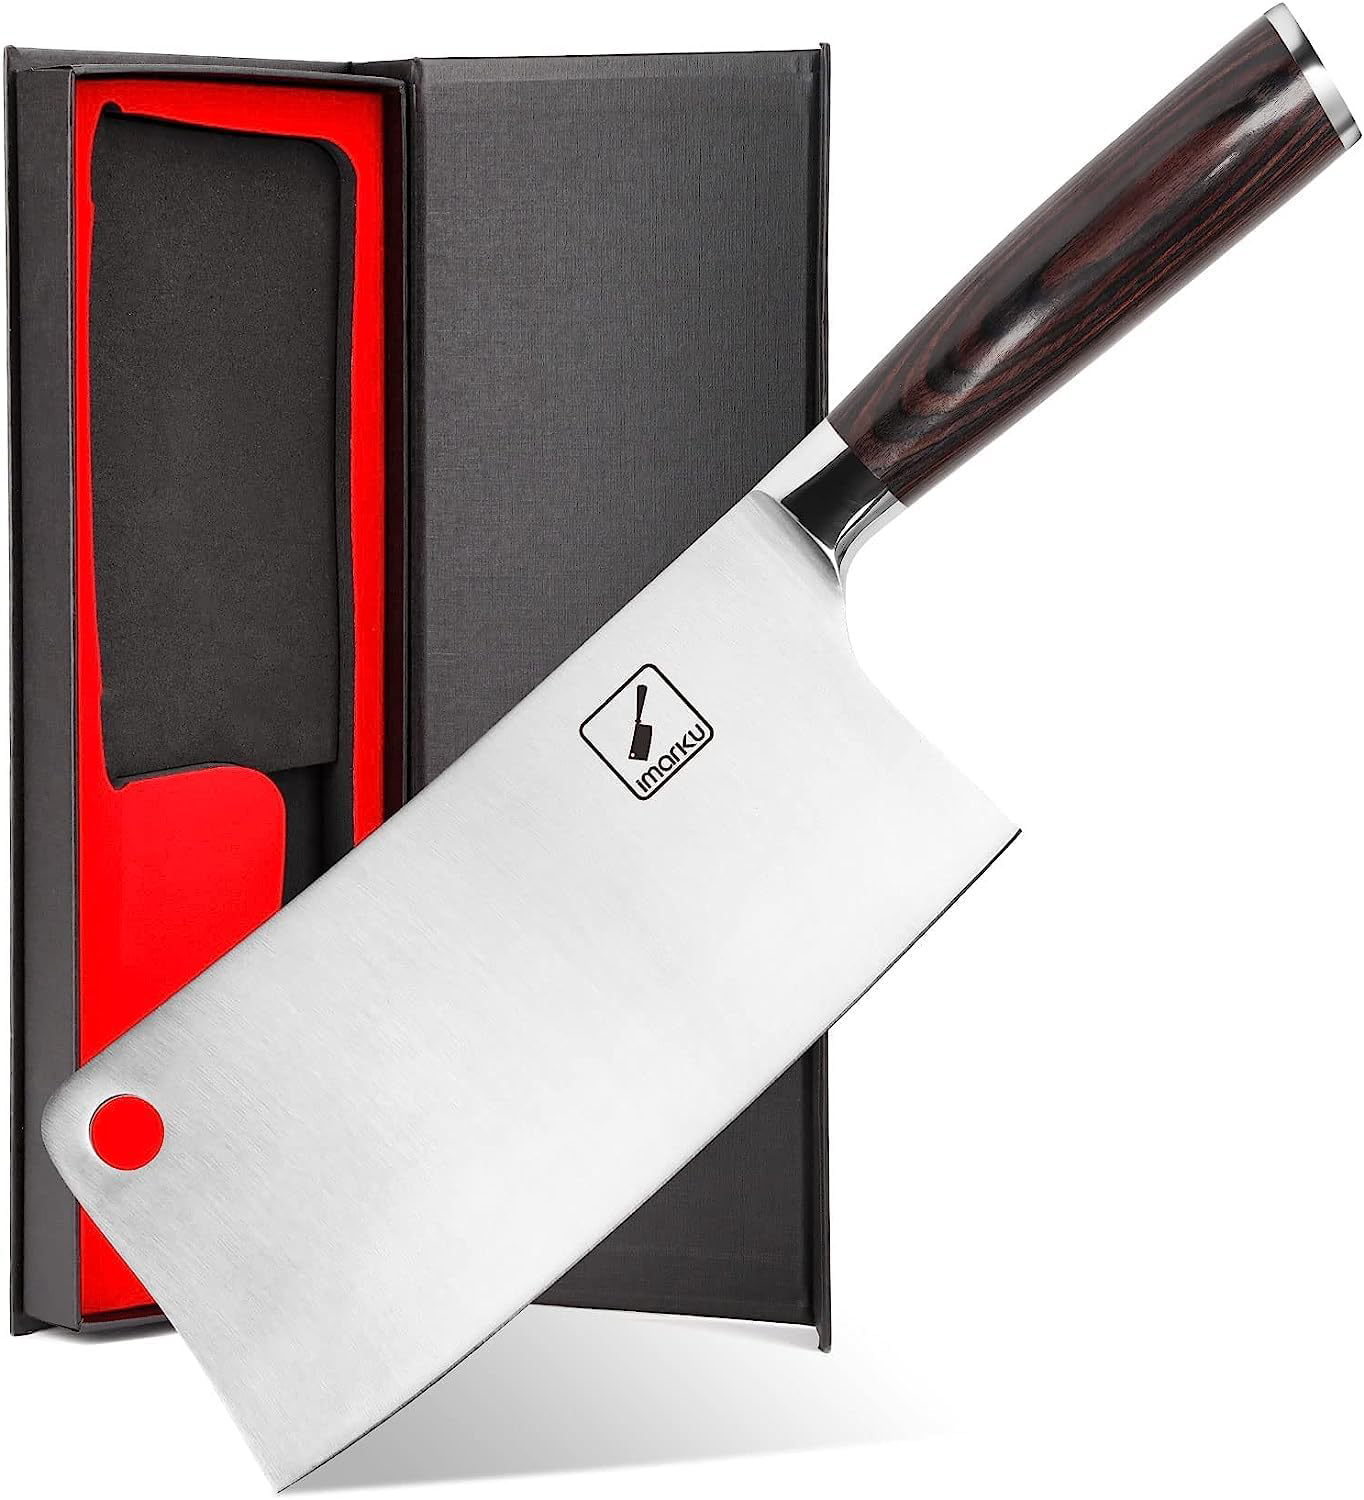 TAN REN Chinese Cleaver Knife, 7.5 Inch Cleaver Knife for Meat Cutting,  High Carbon Steel Butcher Knife,Full Tang Meat Cleaver Knife for Home  Kitchen